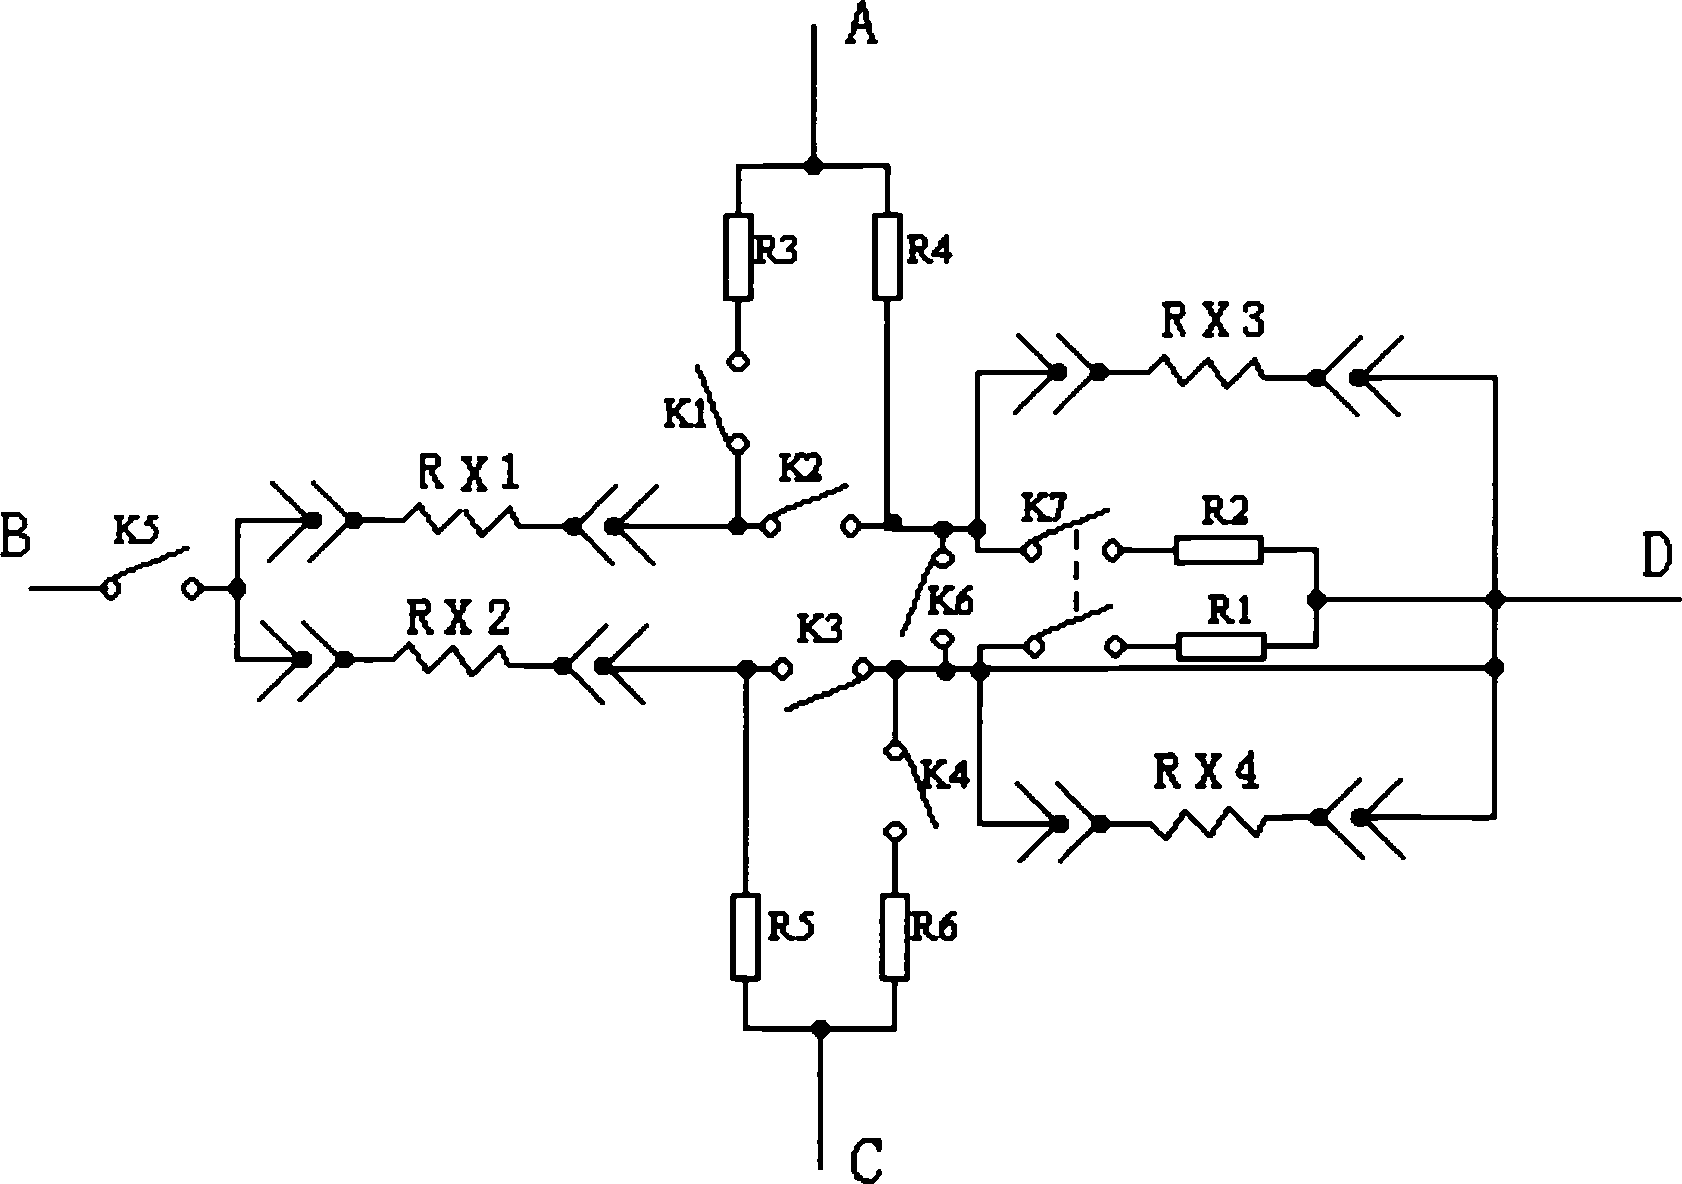 Signal switching apparatus of static multi-point strainmeter